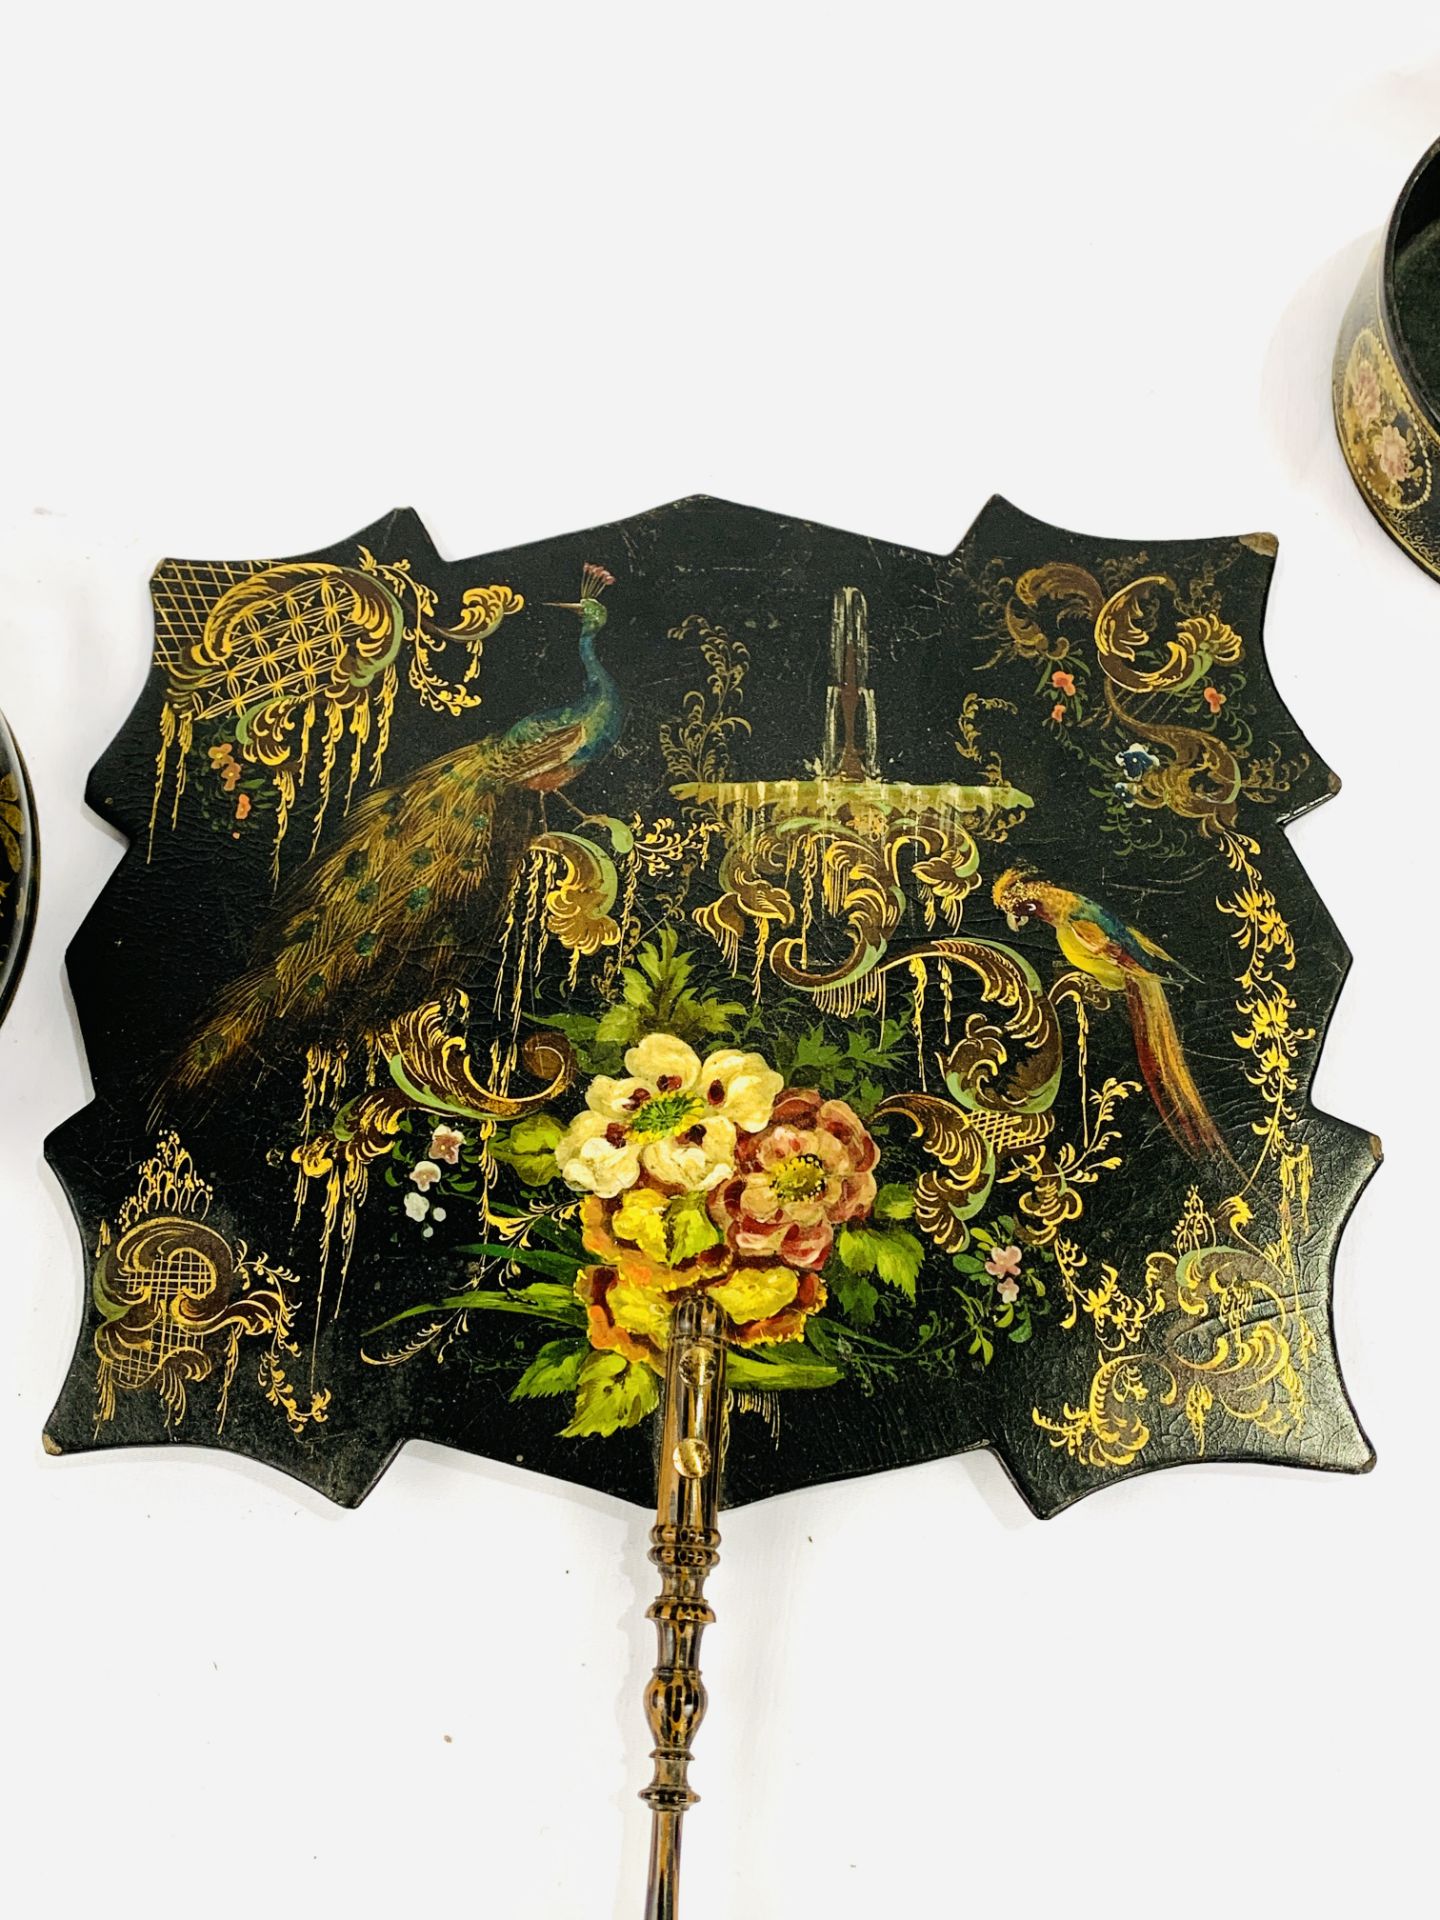 Black shaped wooden fan together with two papier mache bowls - Image 6 of 7